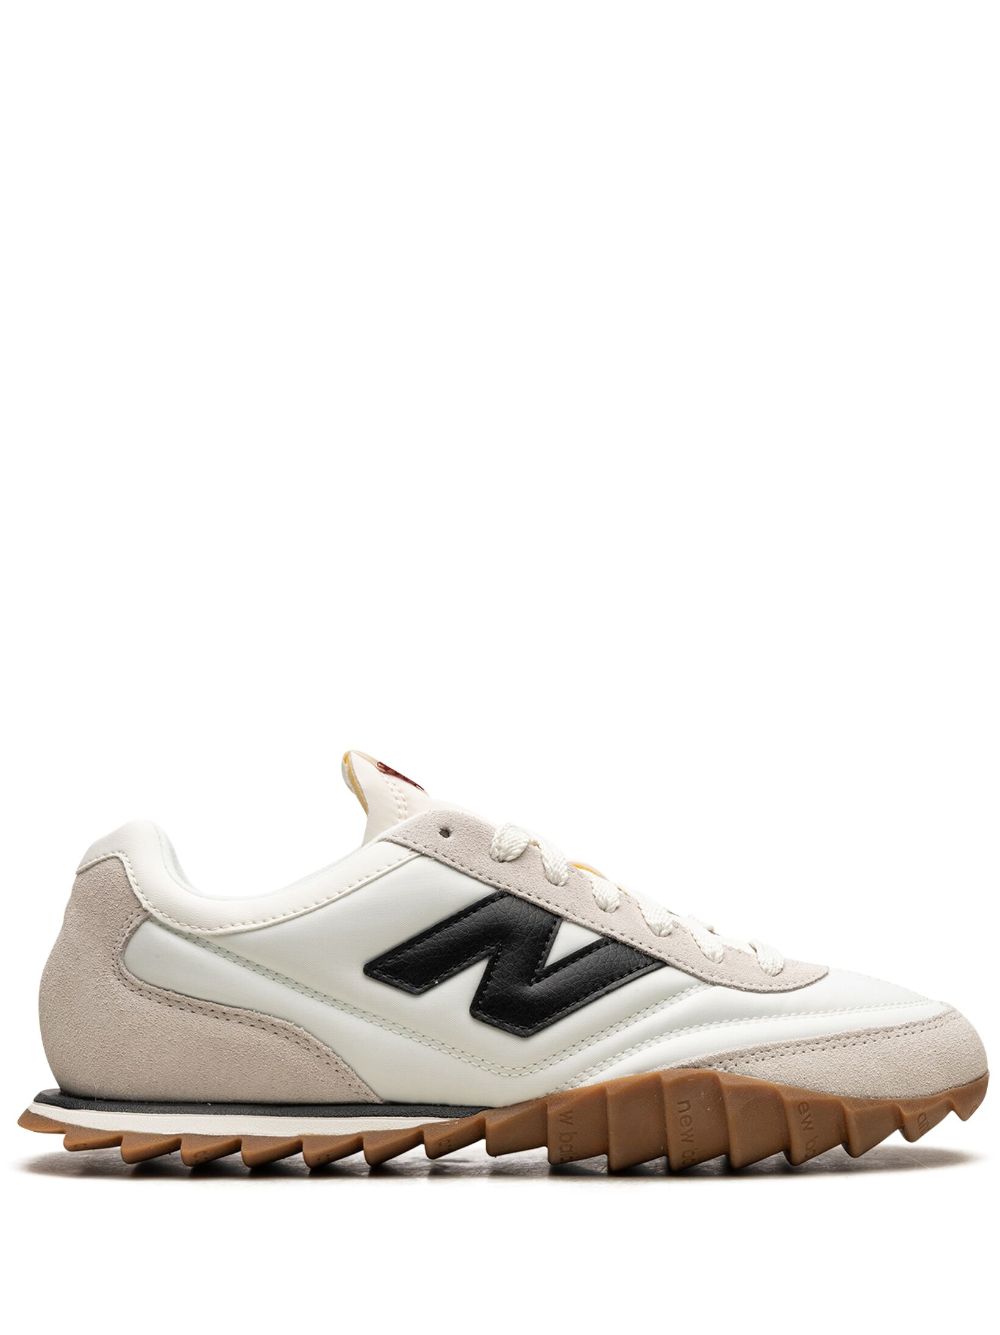 New Balance RC30 suede-trim leather sneakers - White